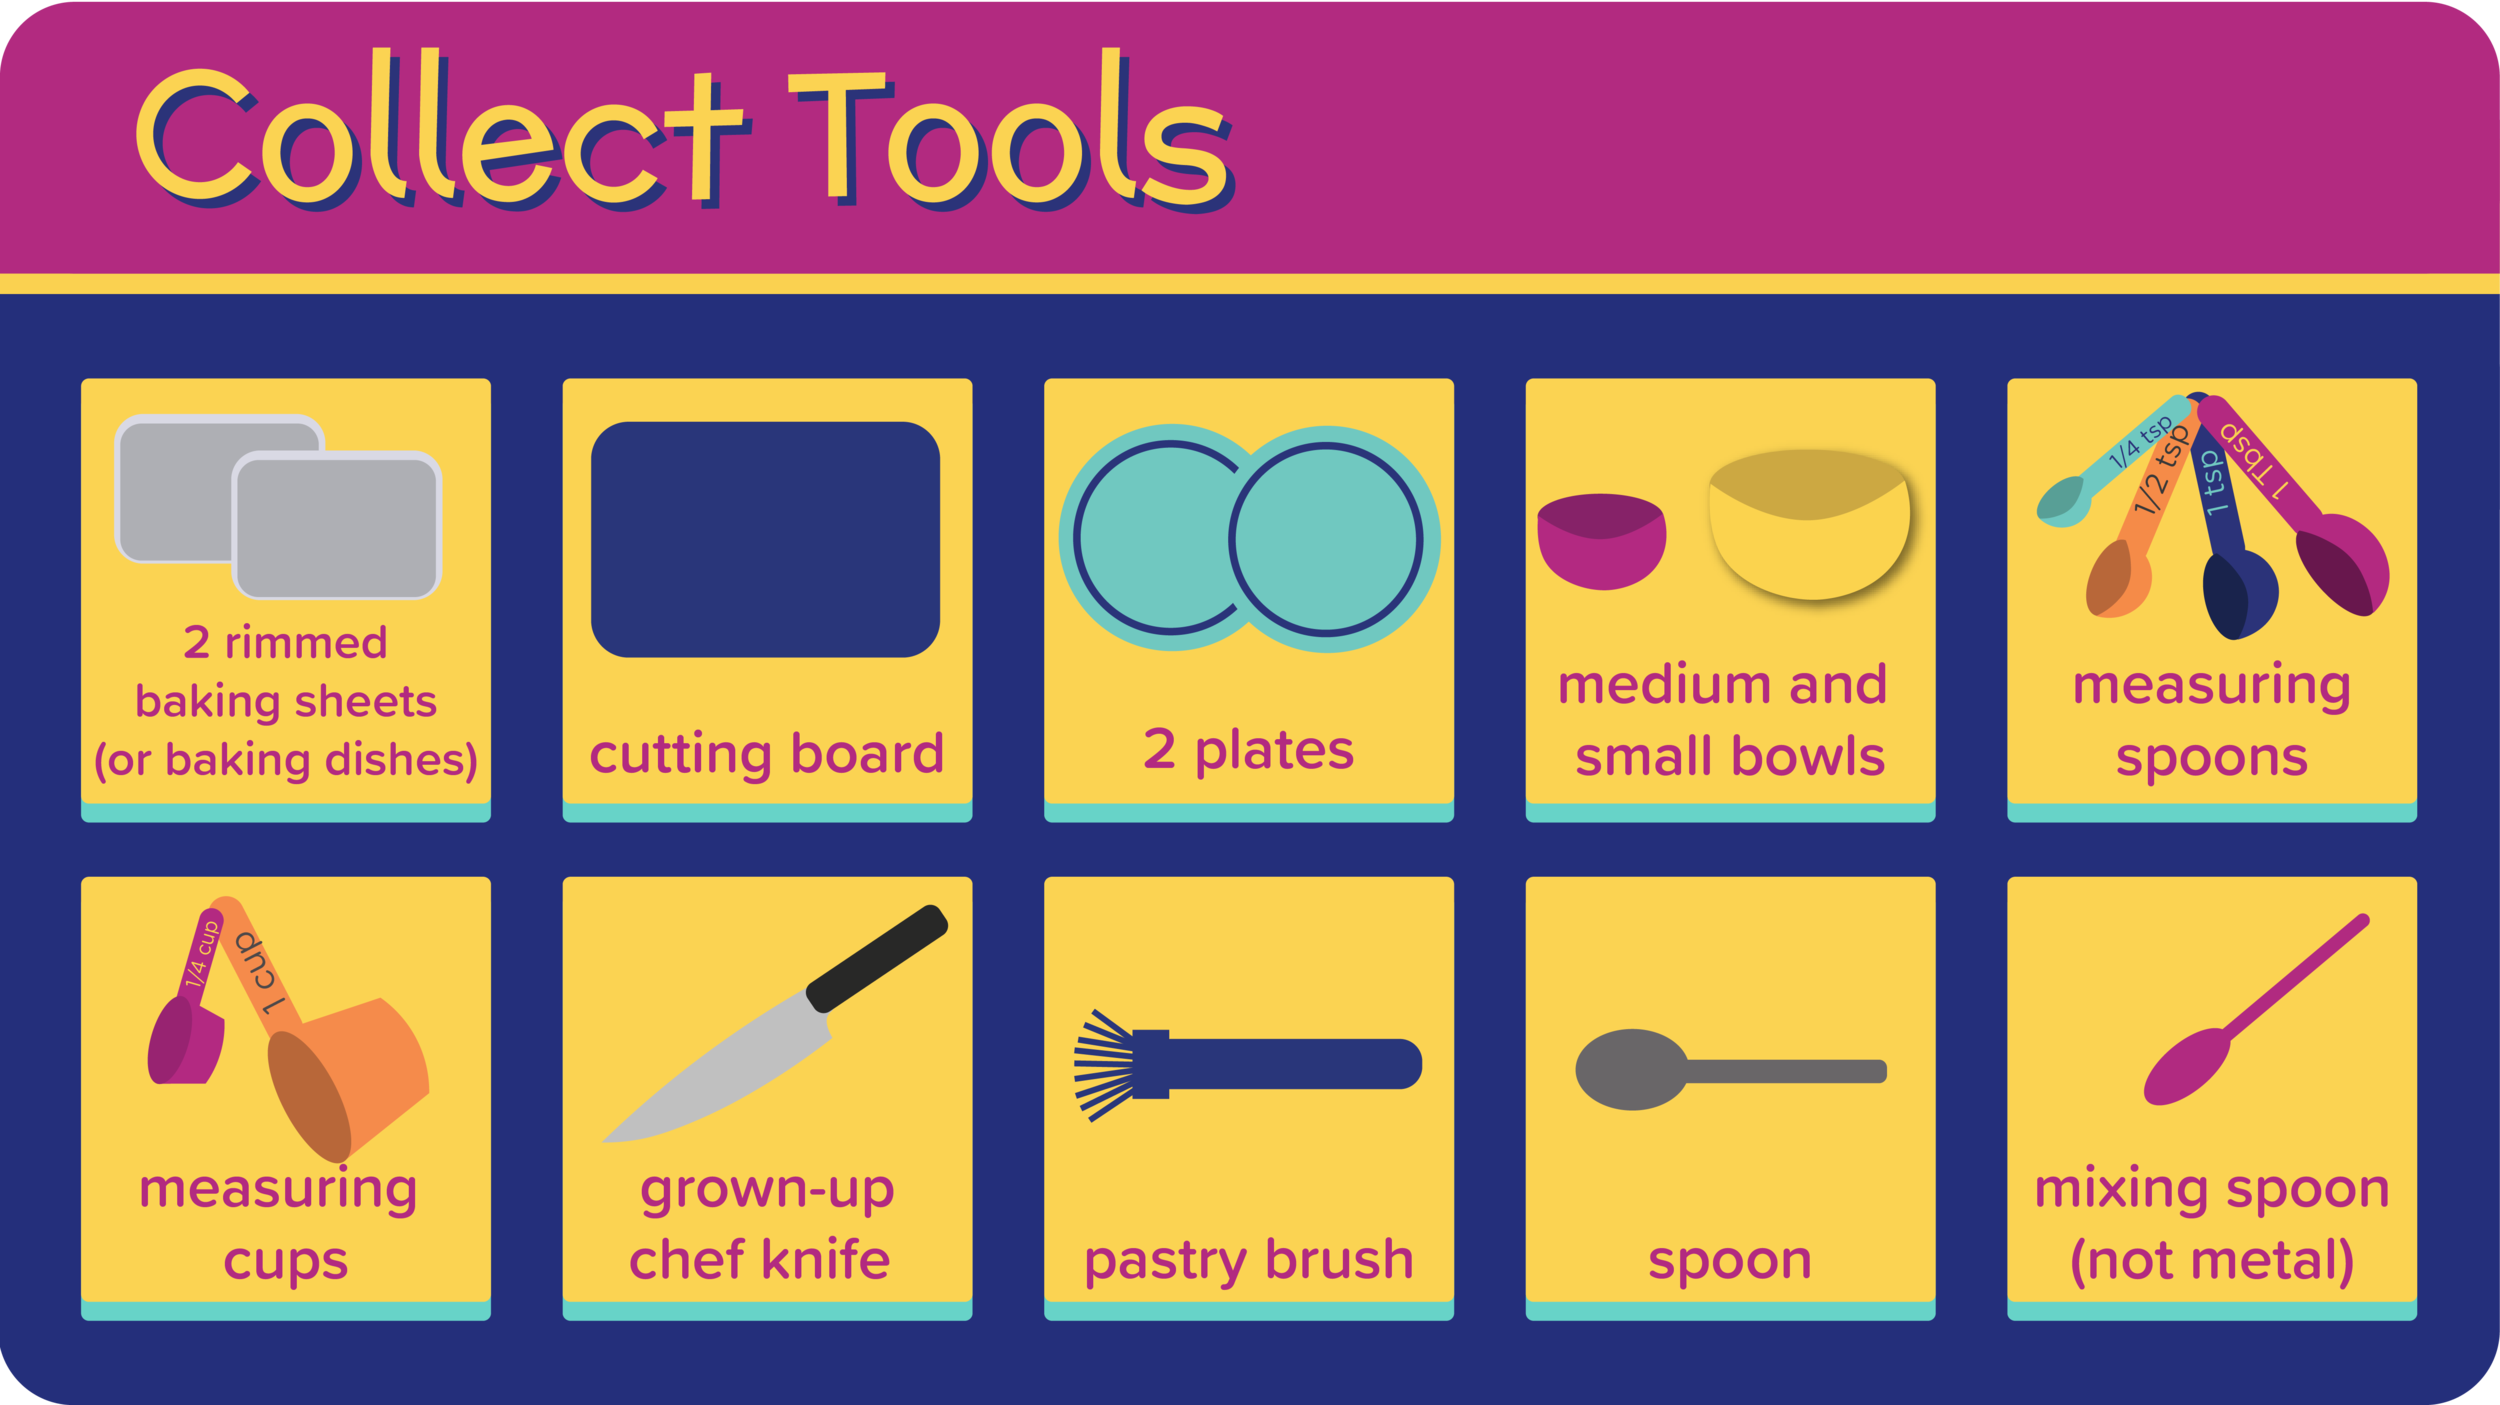 05_ChickenFingersButternutBrussels_Collect Tools-01.png